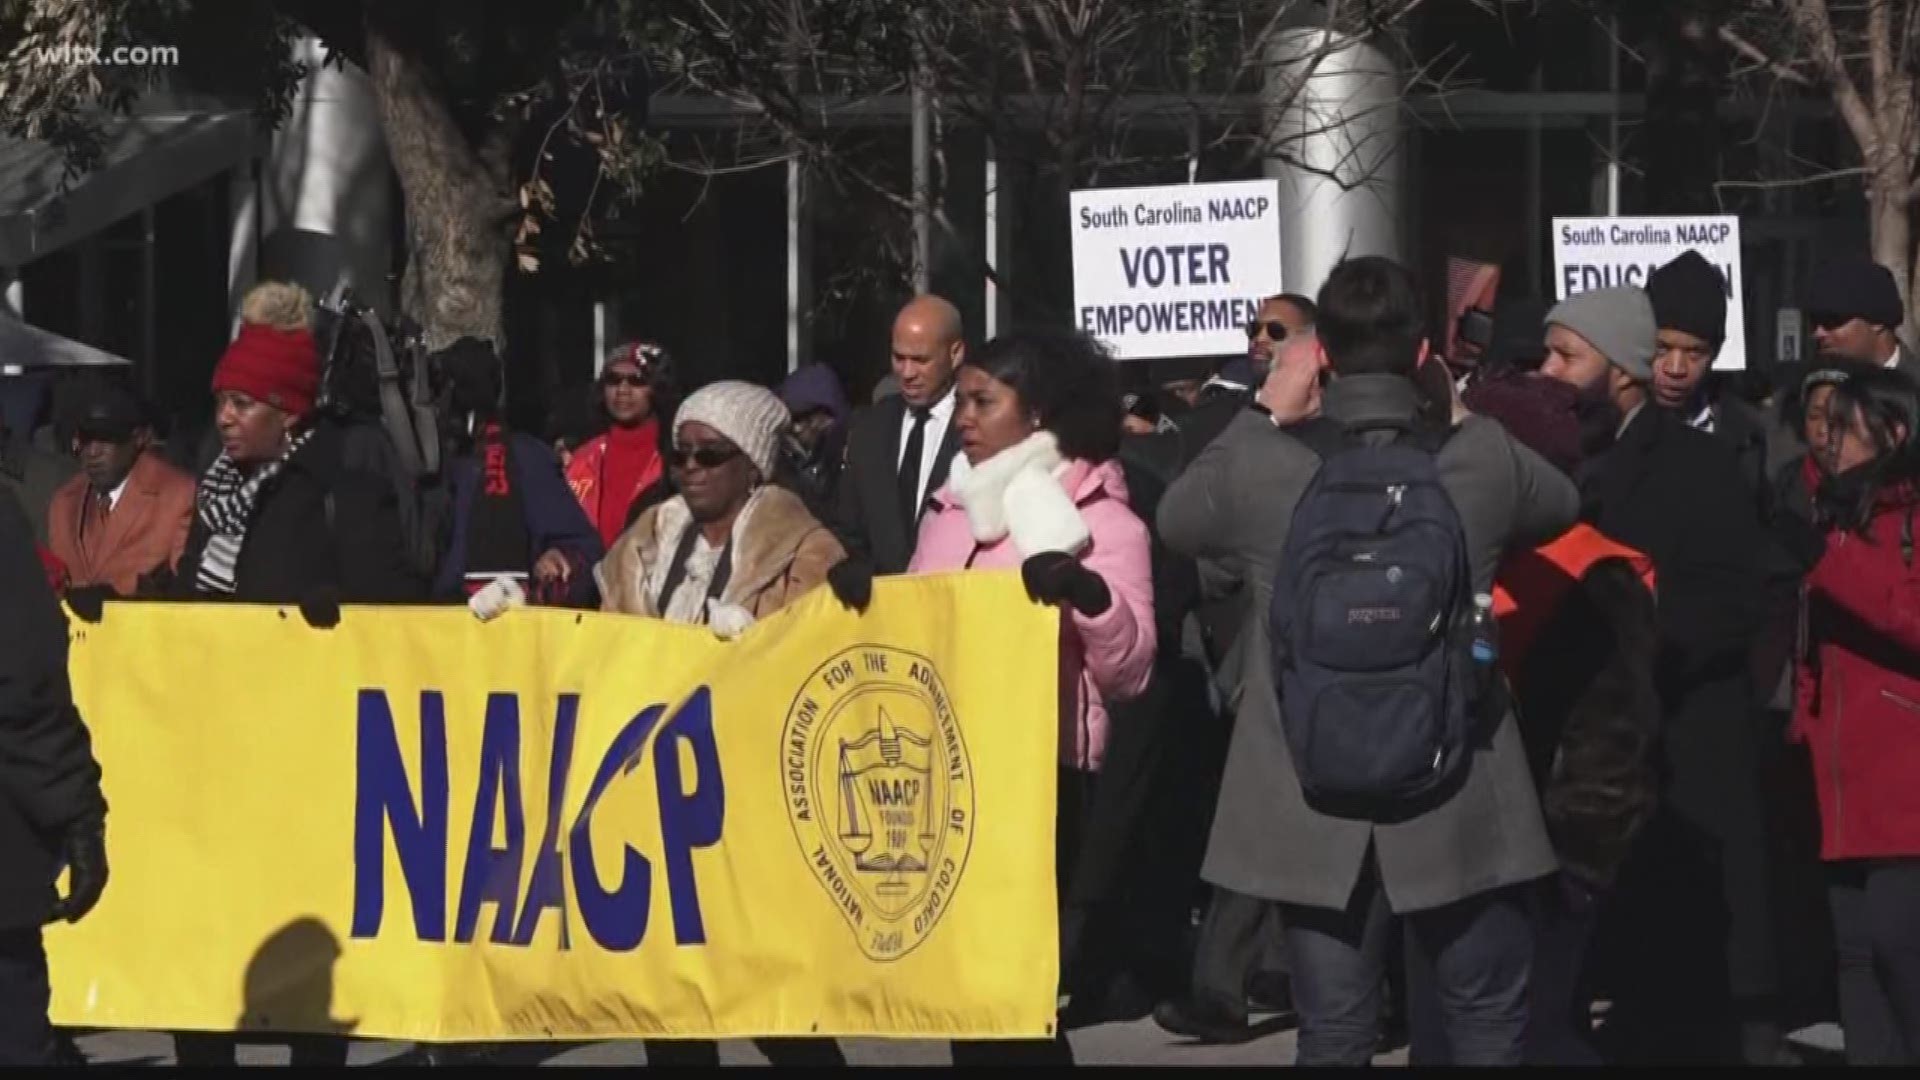 Hundreds of people came out to the State House in Columbia to honor Martin Luther King Jr. and hear from potential Democratic candidates for president.